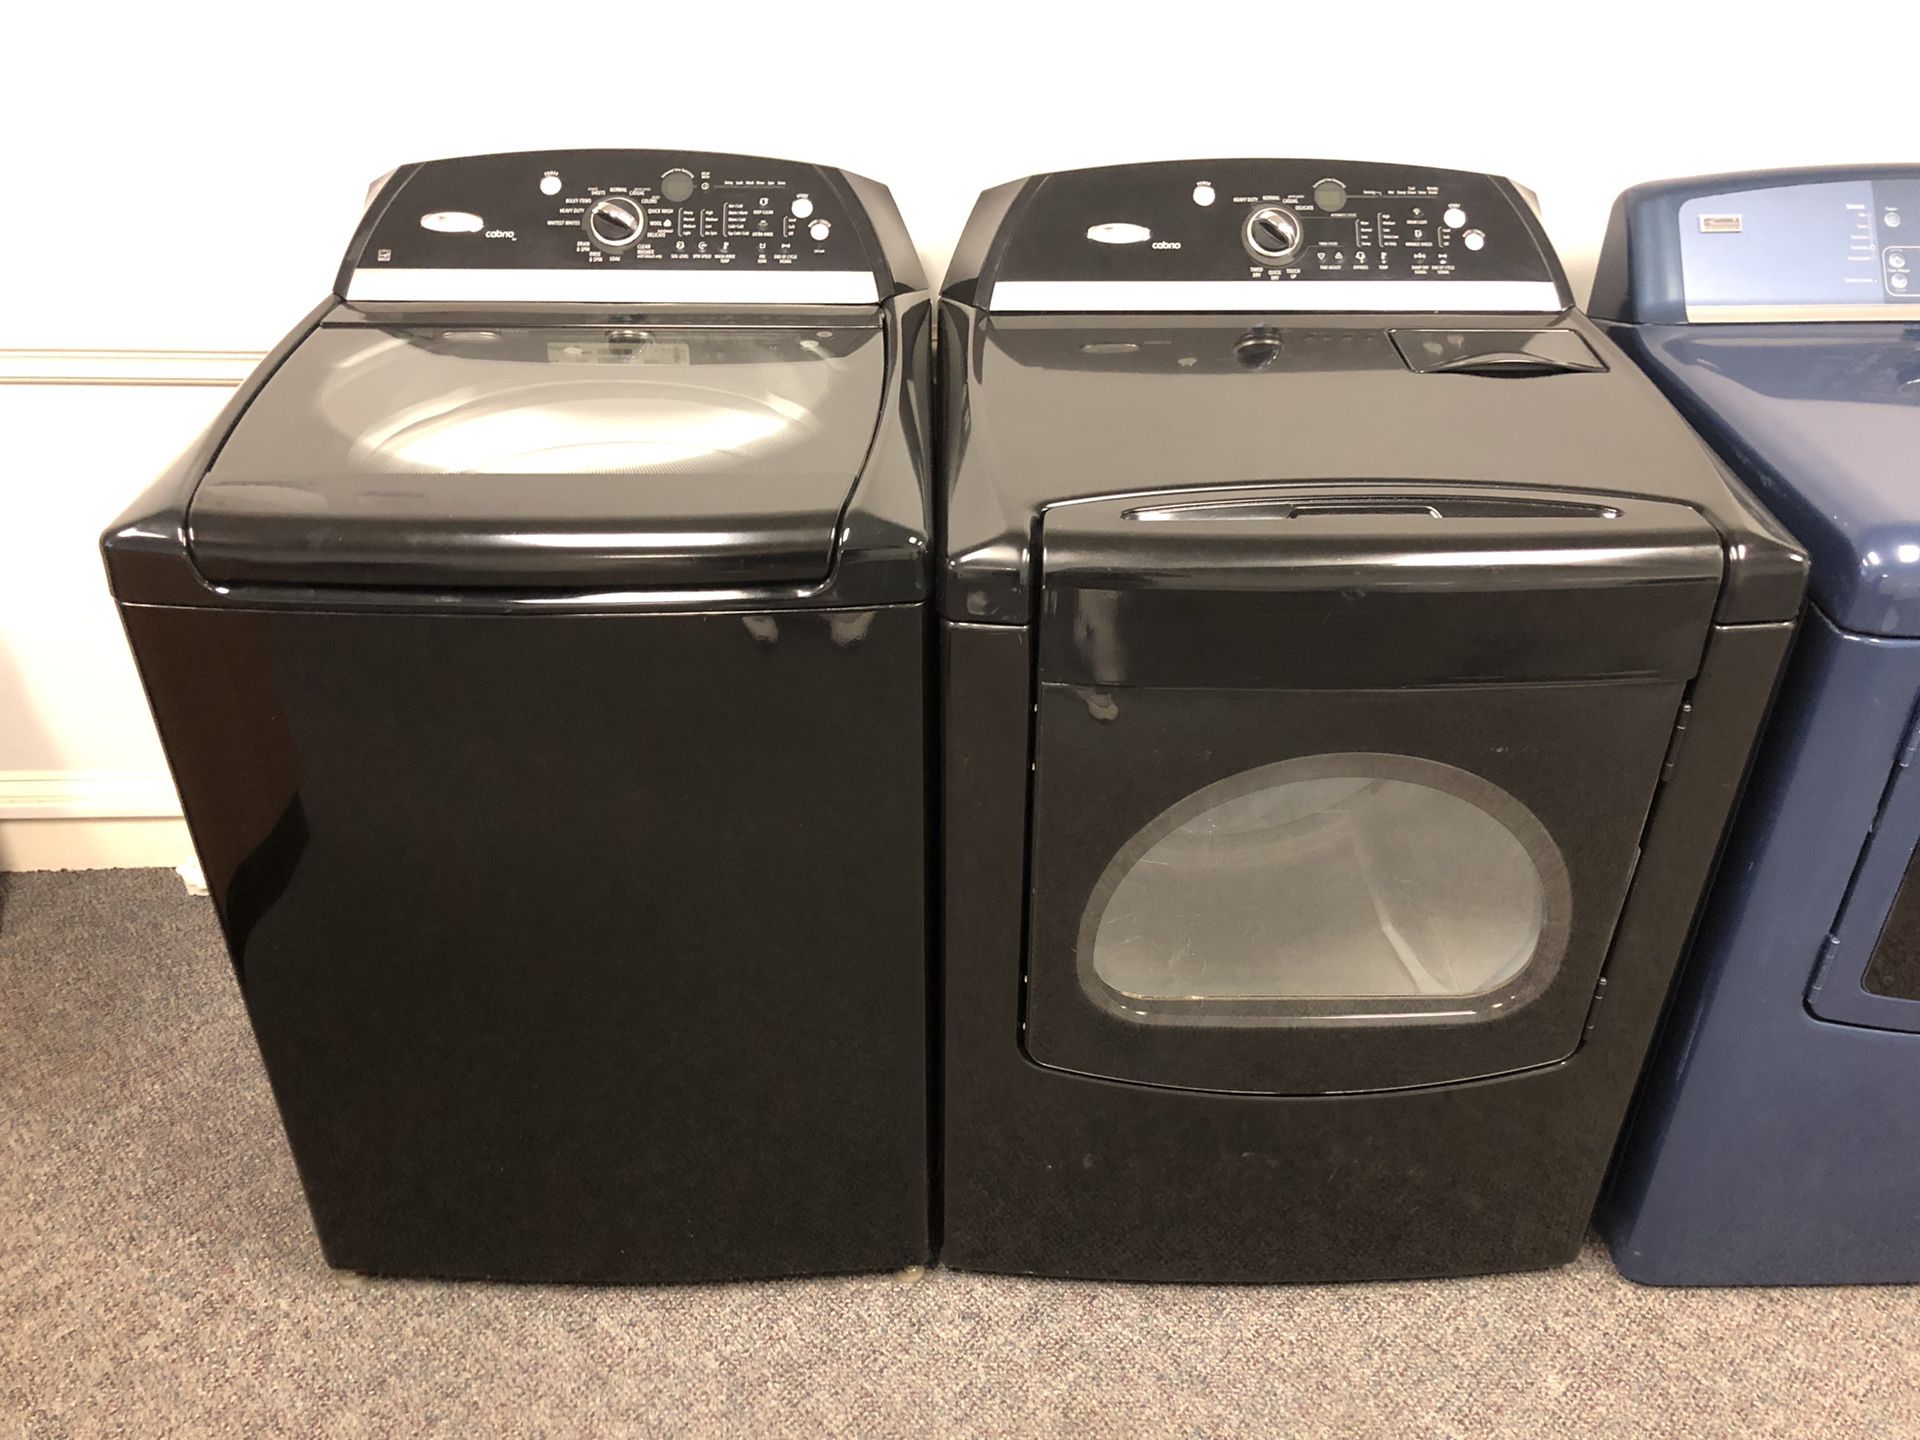 Black Whirlpool Cabrio XL h/e Washer and Dryer Set